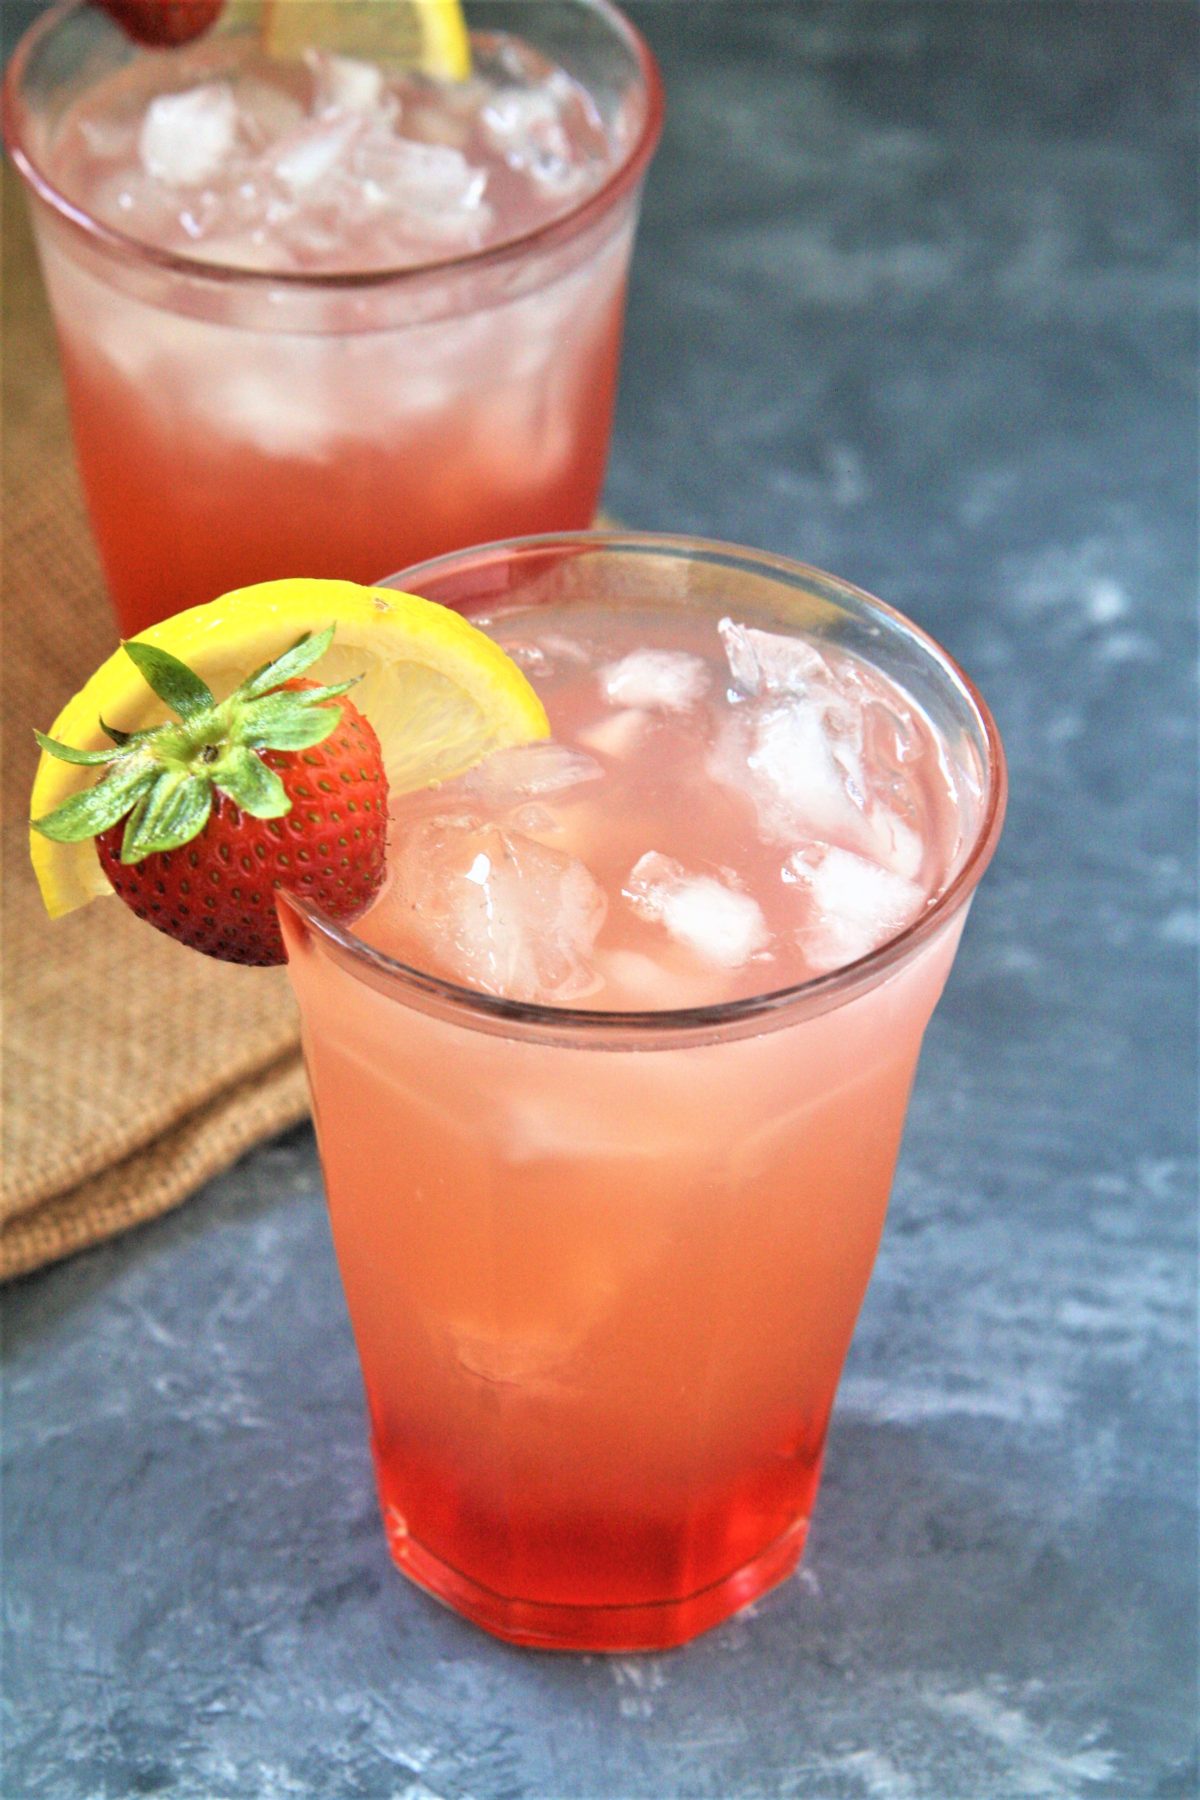 Sweet, tart, and refreshing. Strawberry Pink Lemonade is the drink you want to sip on at the beach, the park, or your Fourth of July cookout!